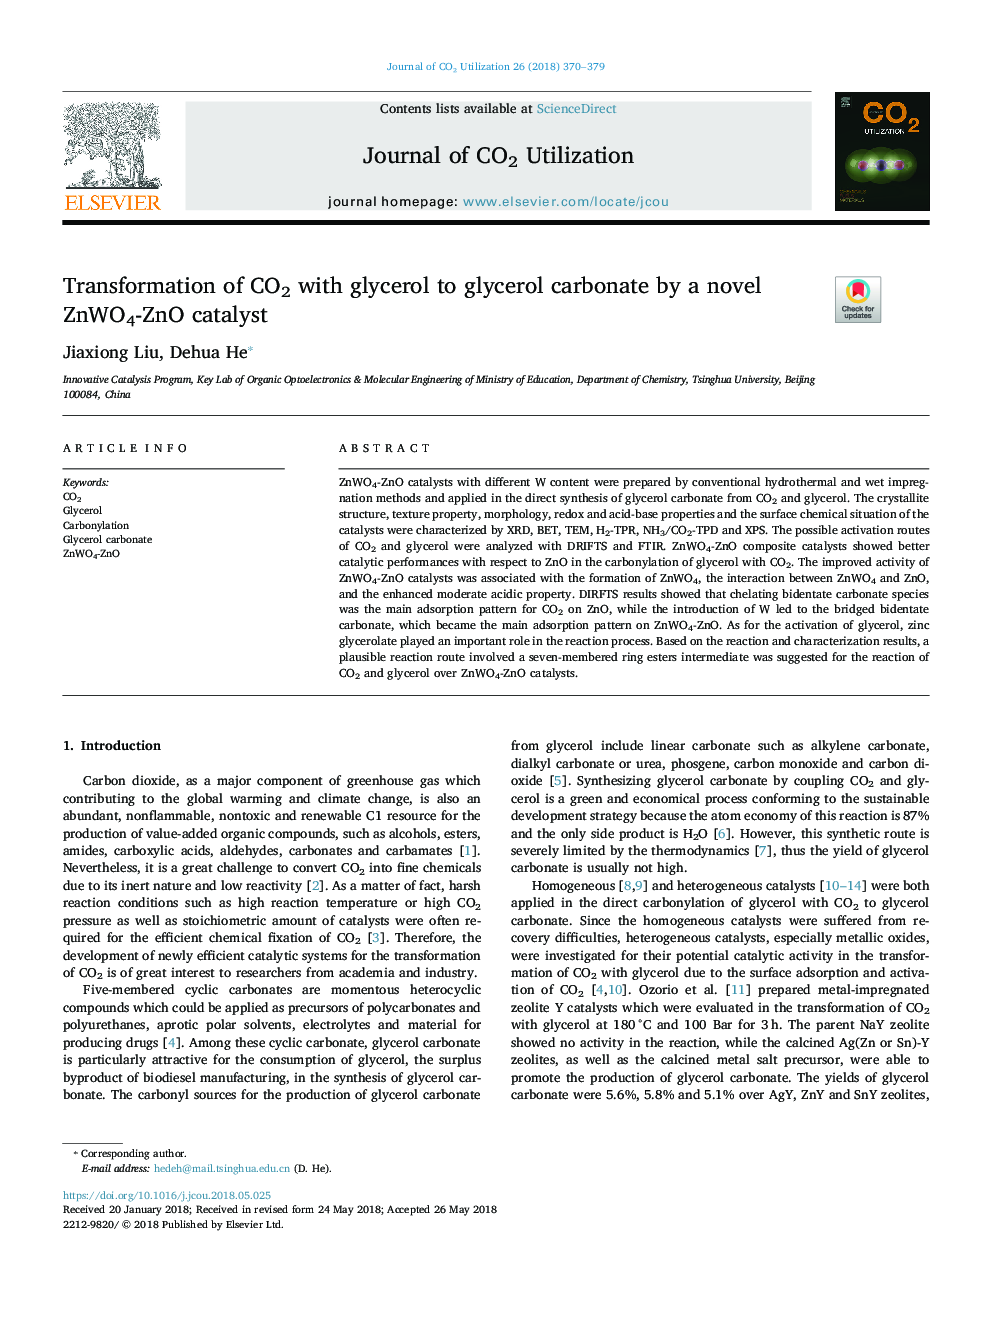 Transformation of CO2 with glycerol to glycerol carbonate by a novel ZnWO4-ZnO catalyst